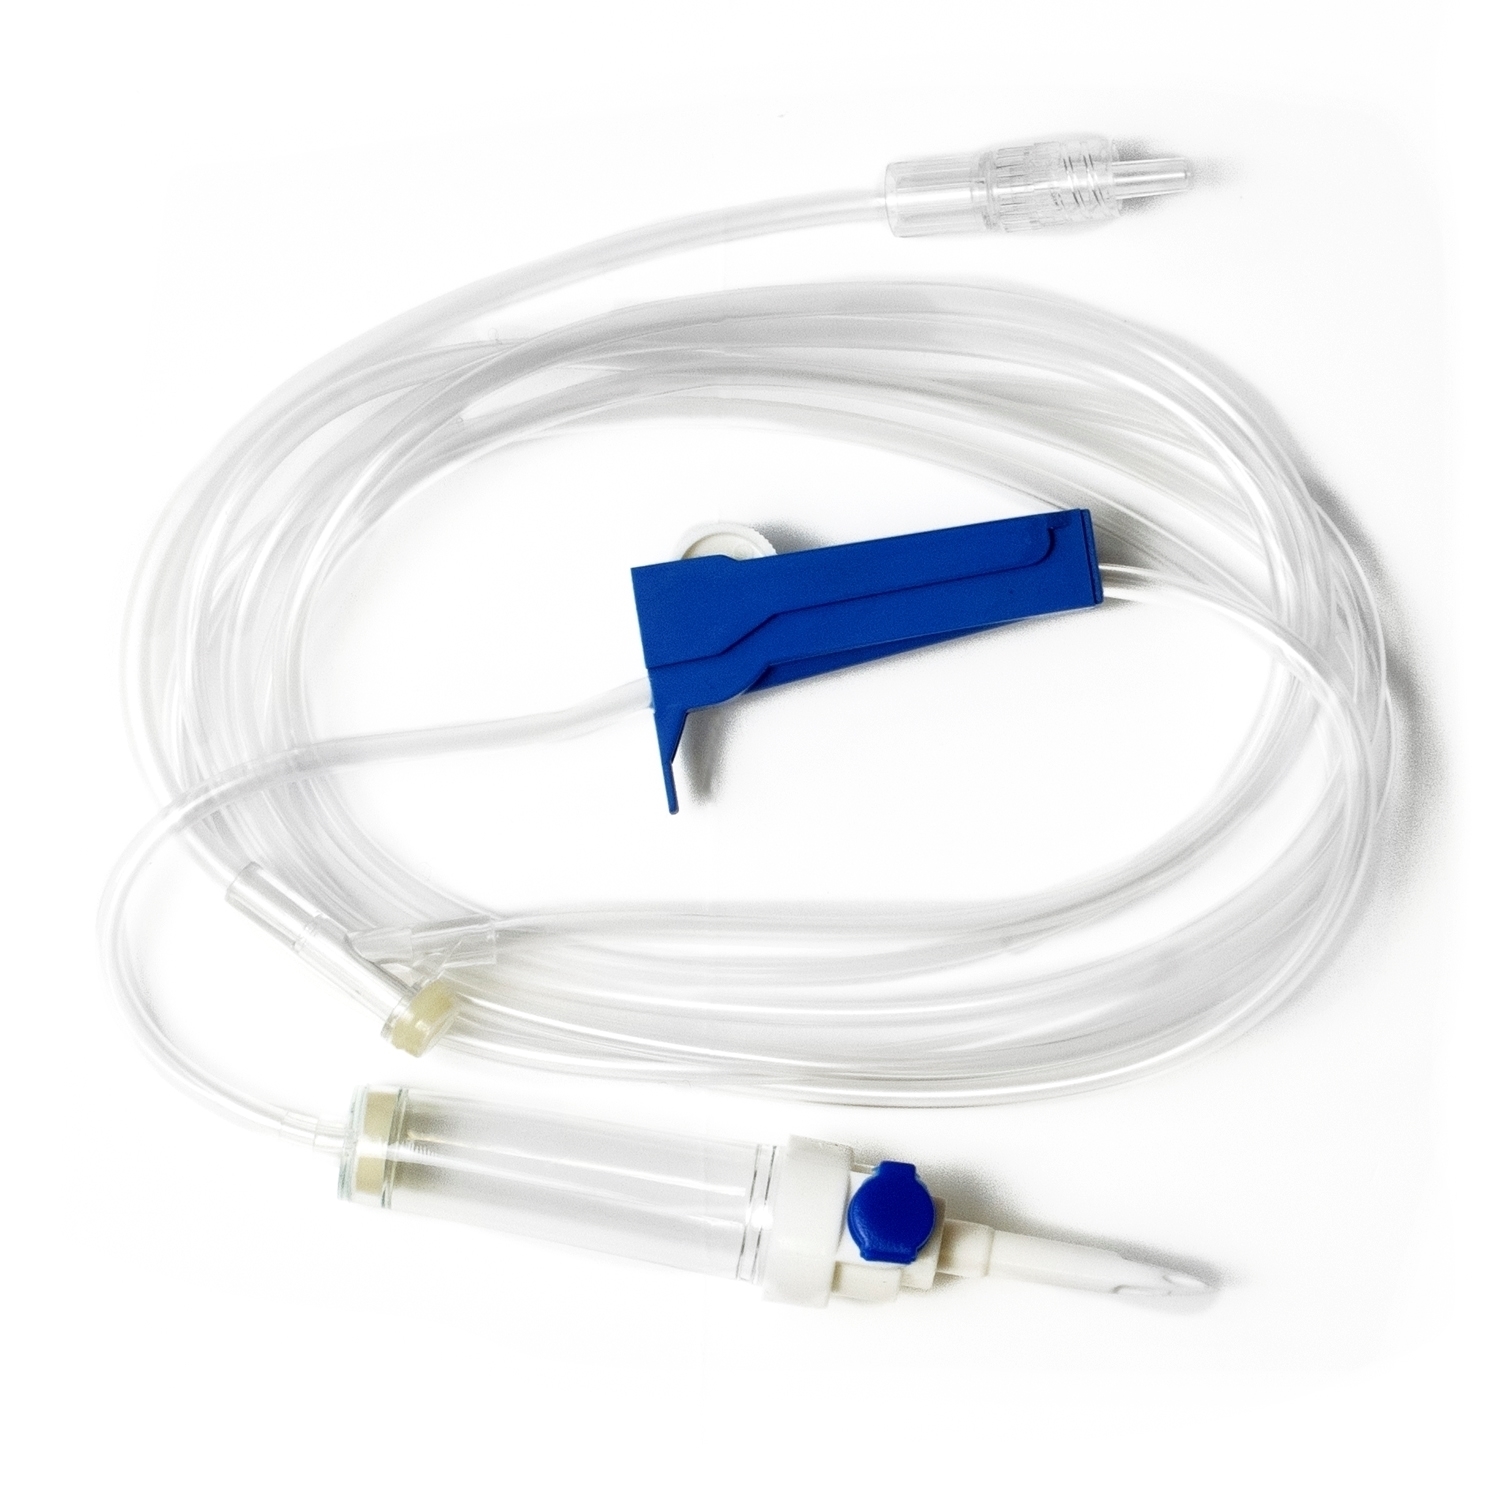 IV Administration Set, 15 Micron Filter, 20 drops/mL, 1 Y-Site,  SwiveLuer-Lock, Latex-free, DEHP-free, 92, Universal Spike